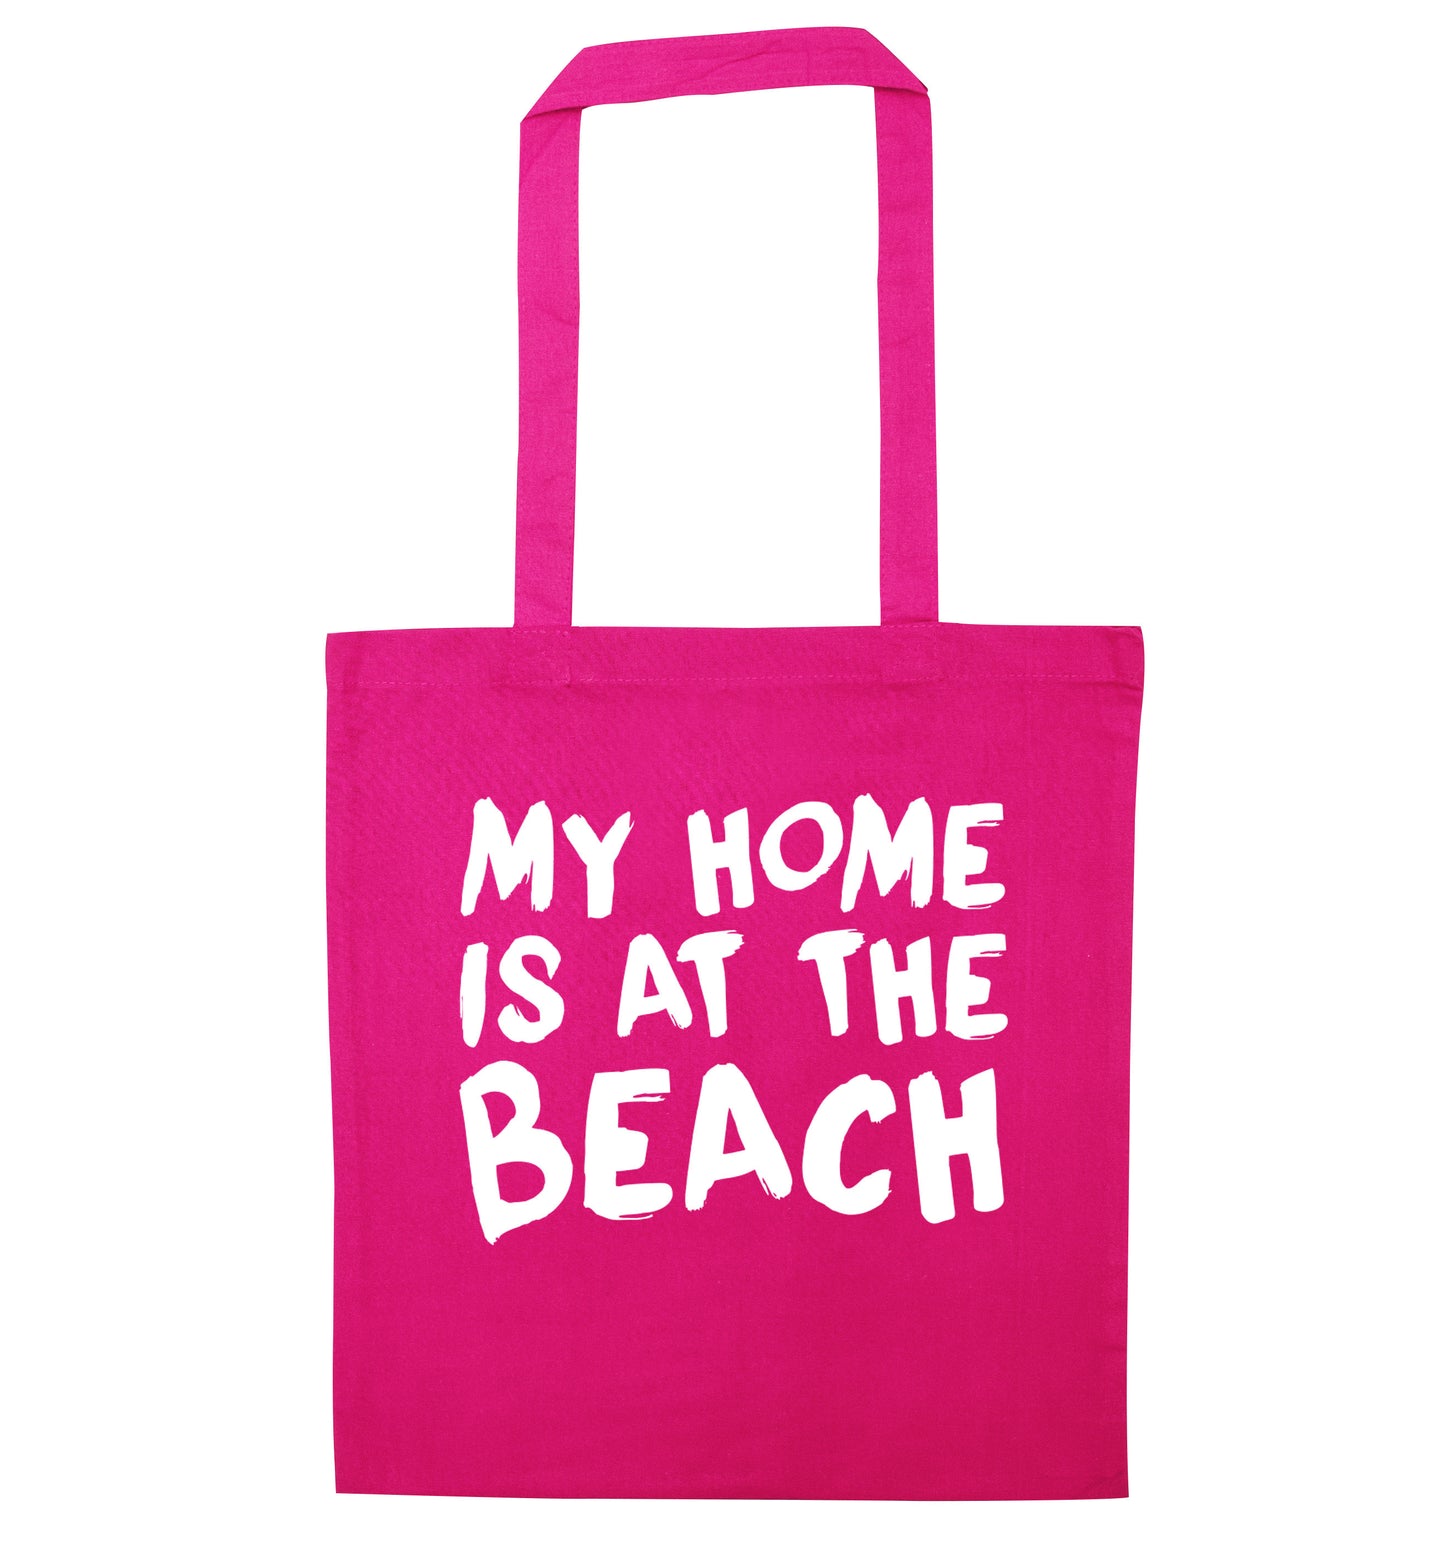 My home is at the beach pink tote bag